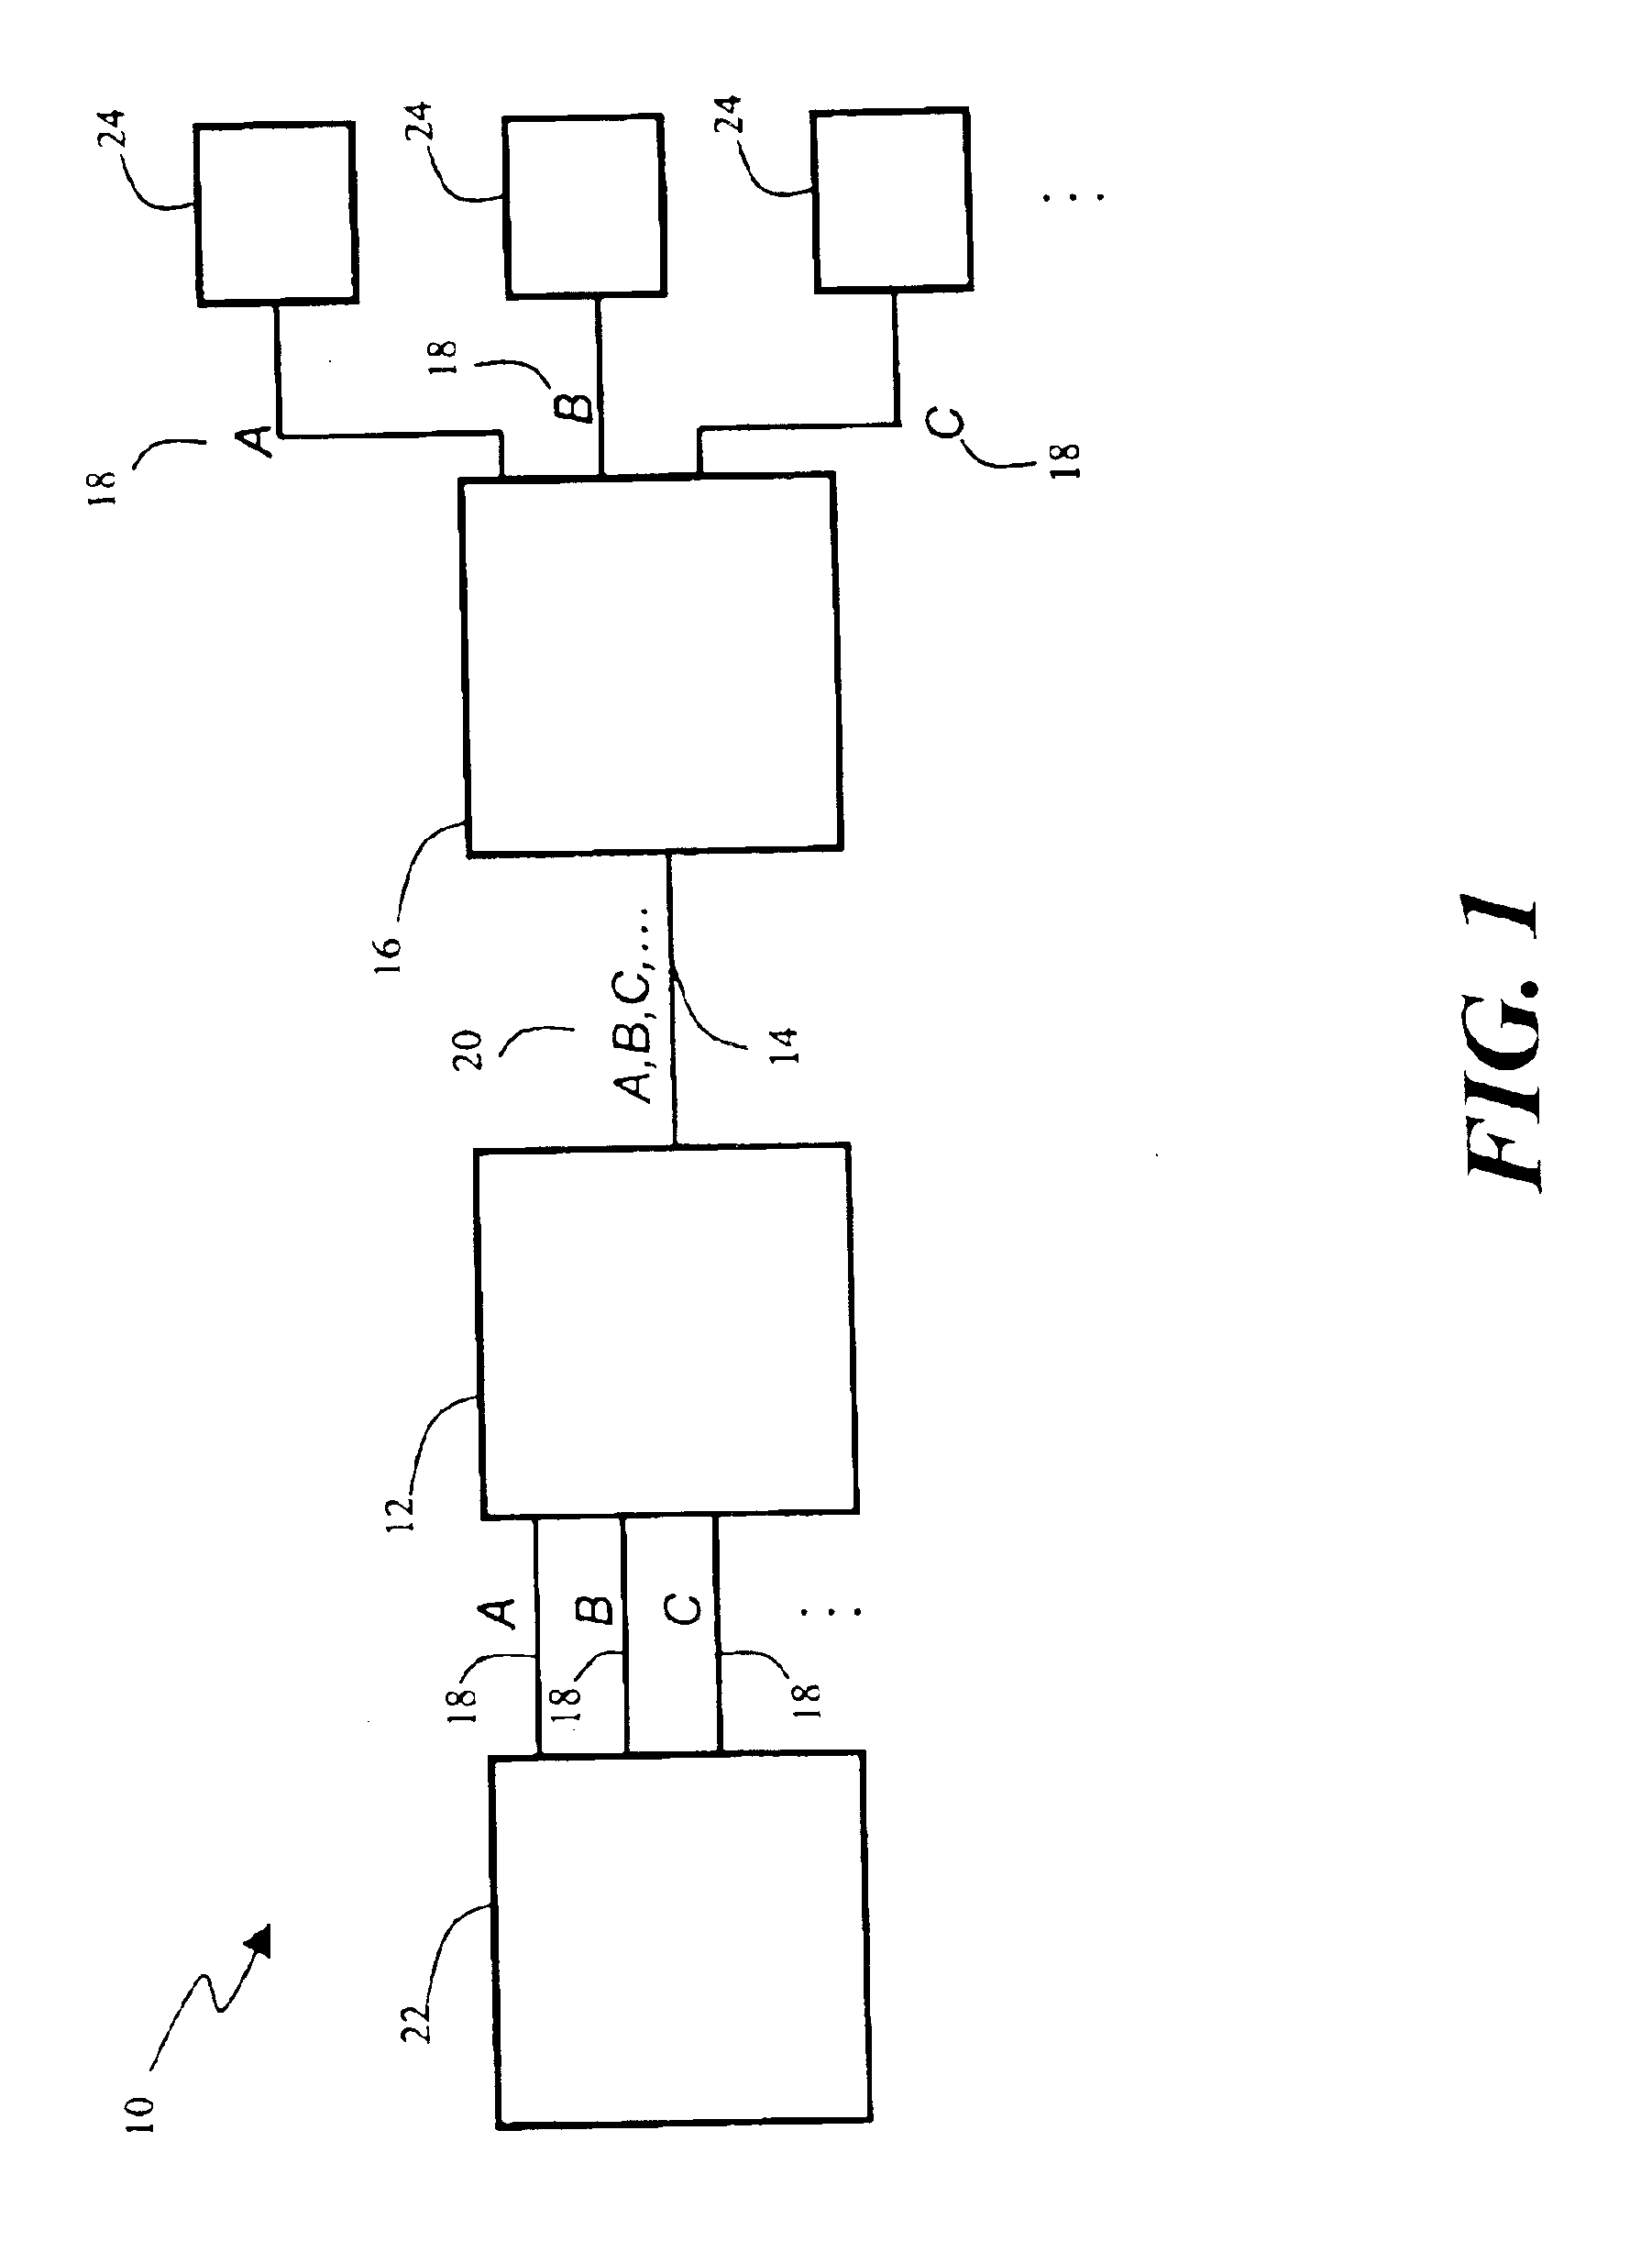 Ultra-high resolution light modulation control system and method